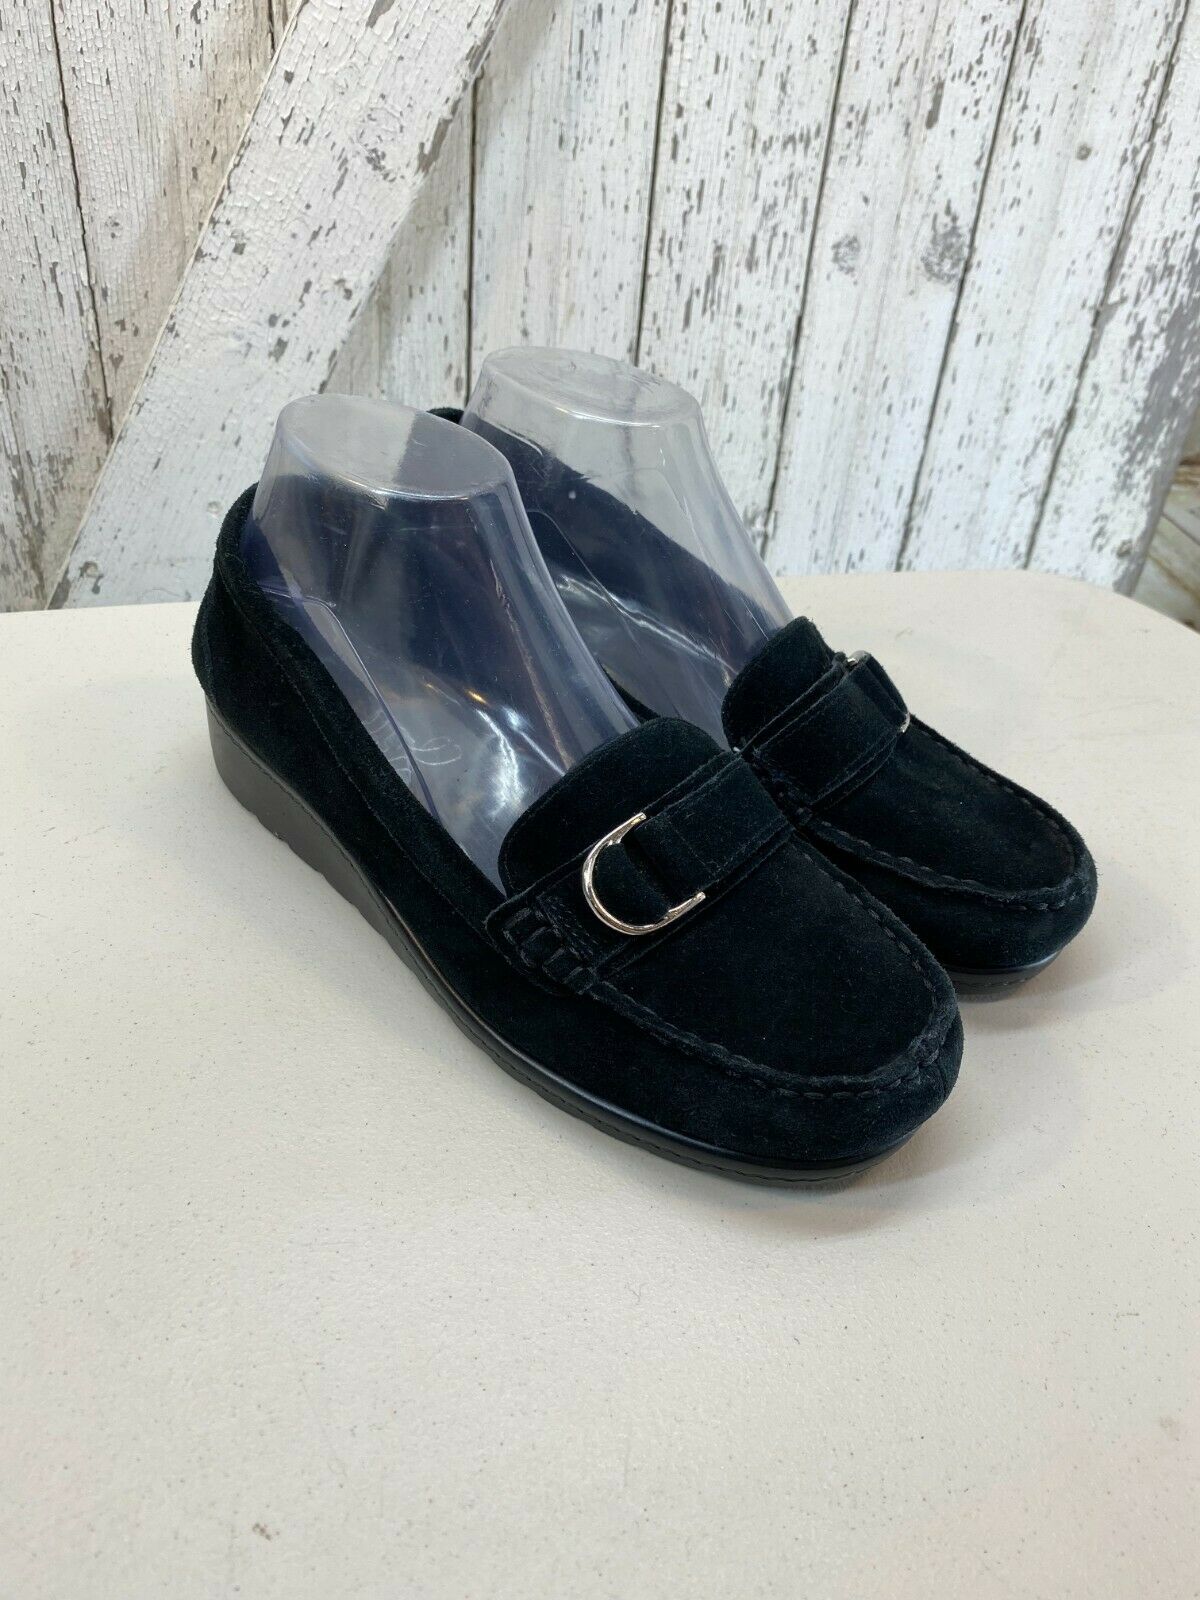 Aerosoles Stitch N Turn Womens Leather Loafers Shoes Size 9M Navy Blue Tassle